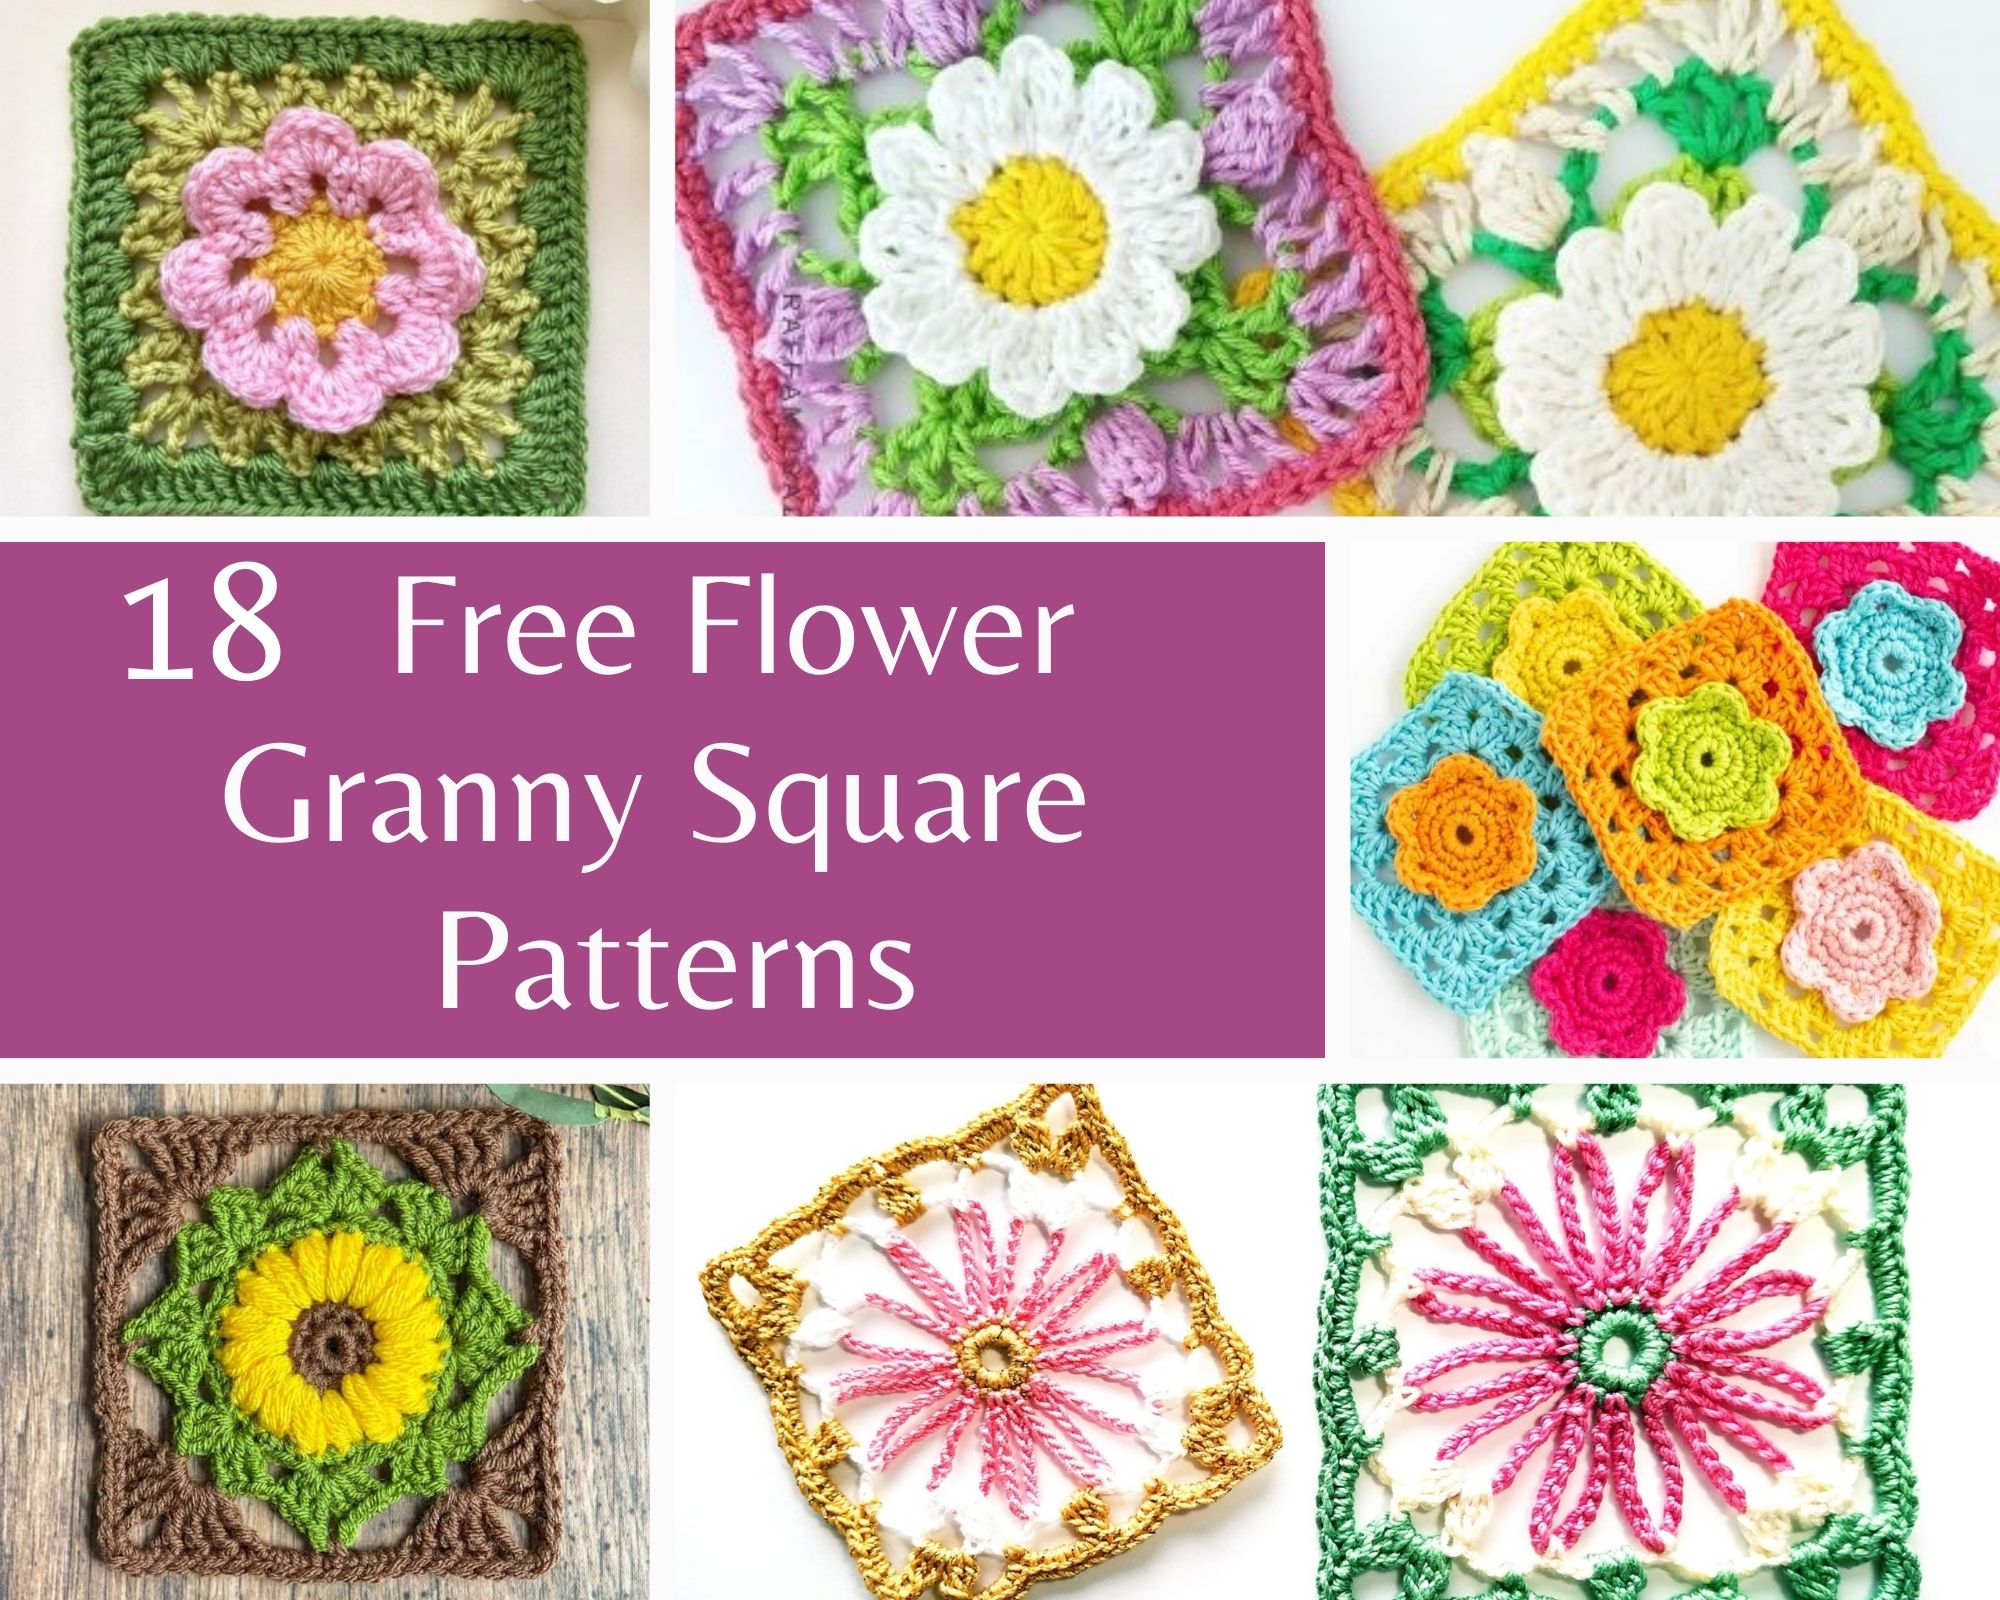 does anyone have a pattern for a 70s style flower granny square please? : r/ crochet